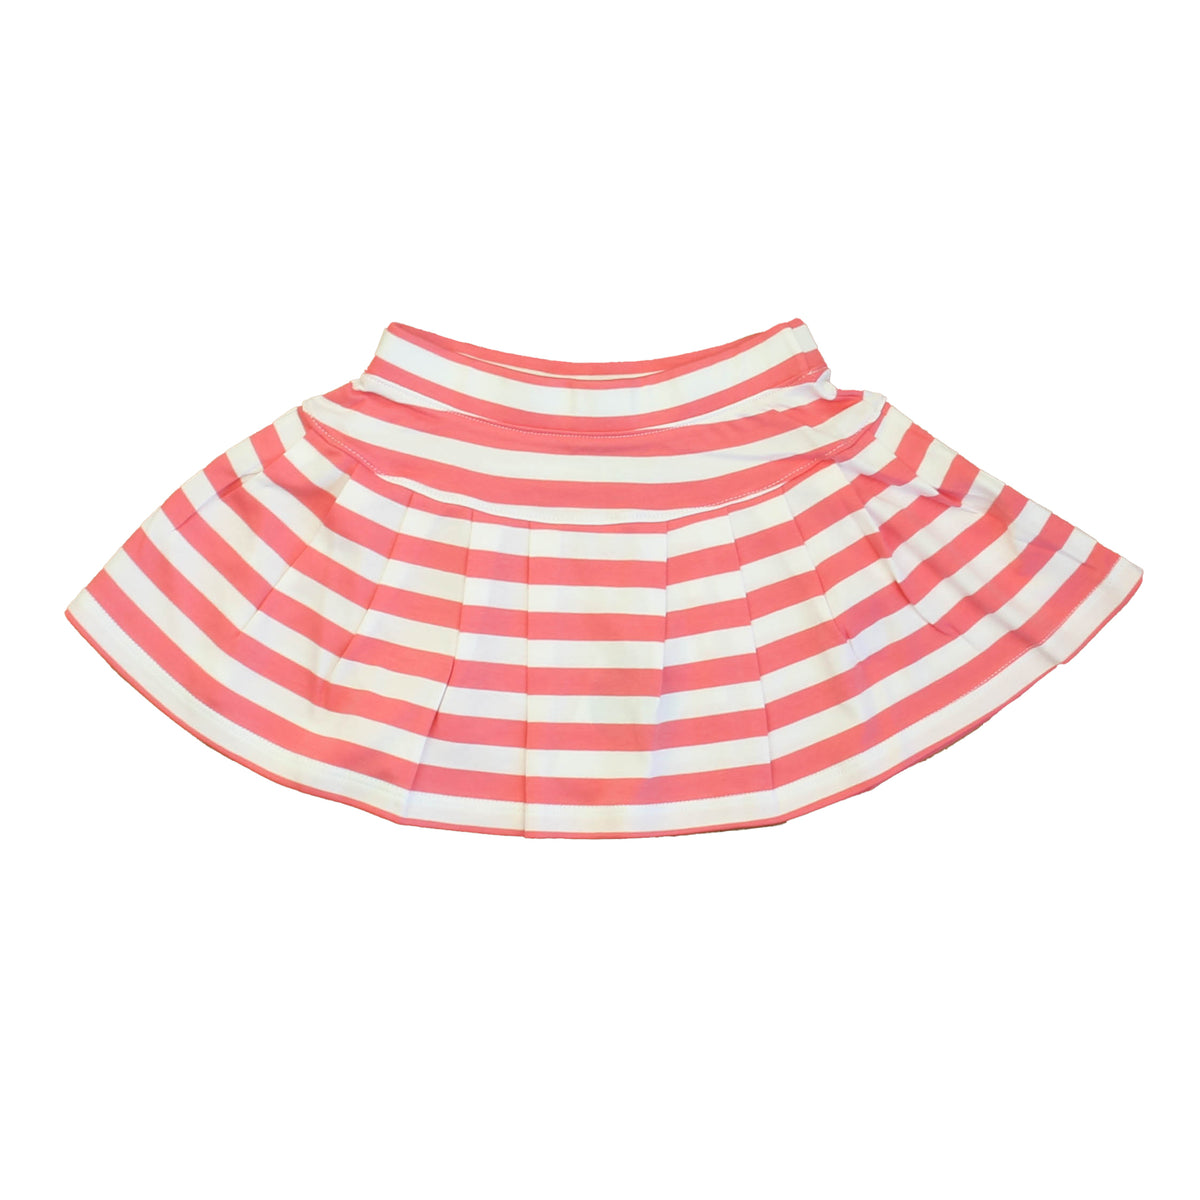 New with Tags: Sunkissed Coral | Bright White Stripe Skirt size: 2-5T -- FINAL SALE